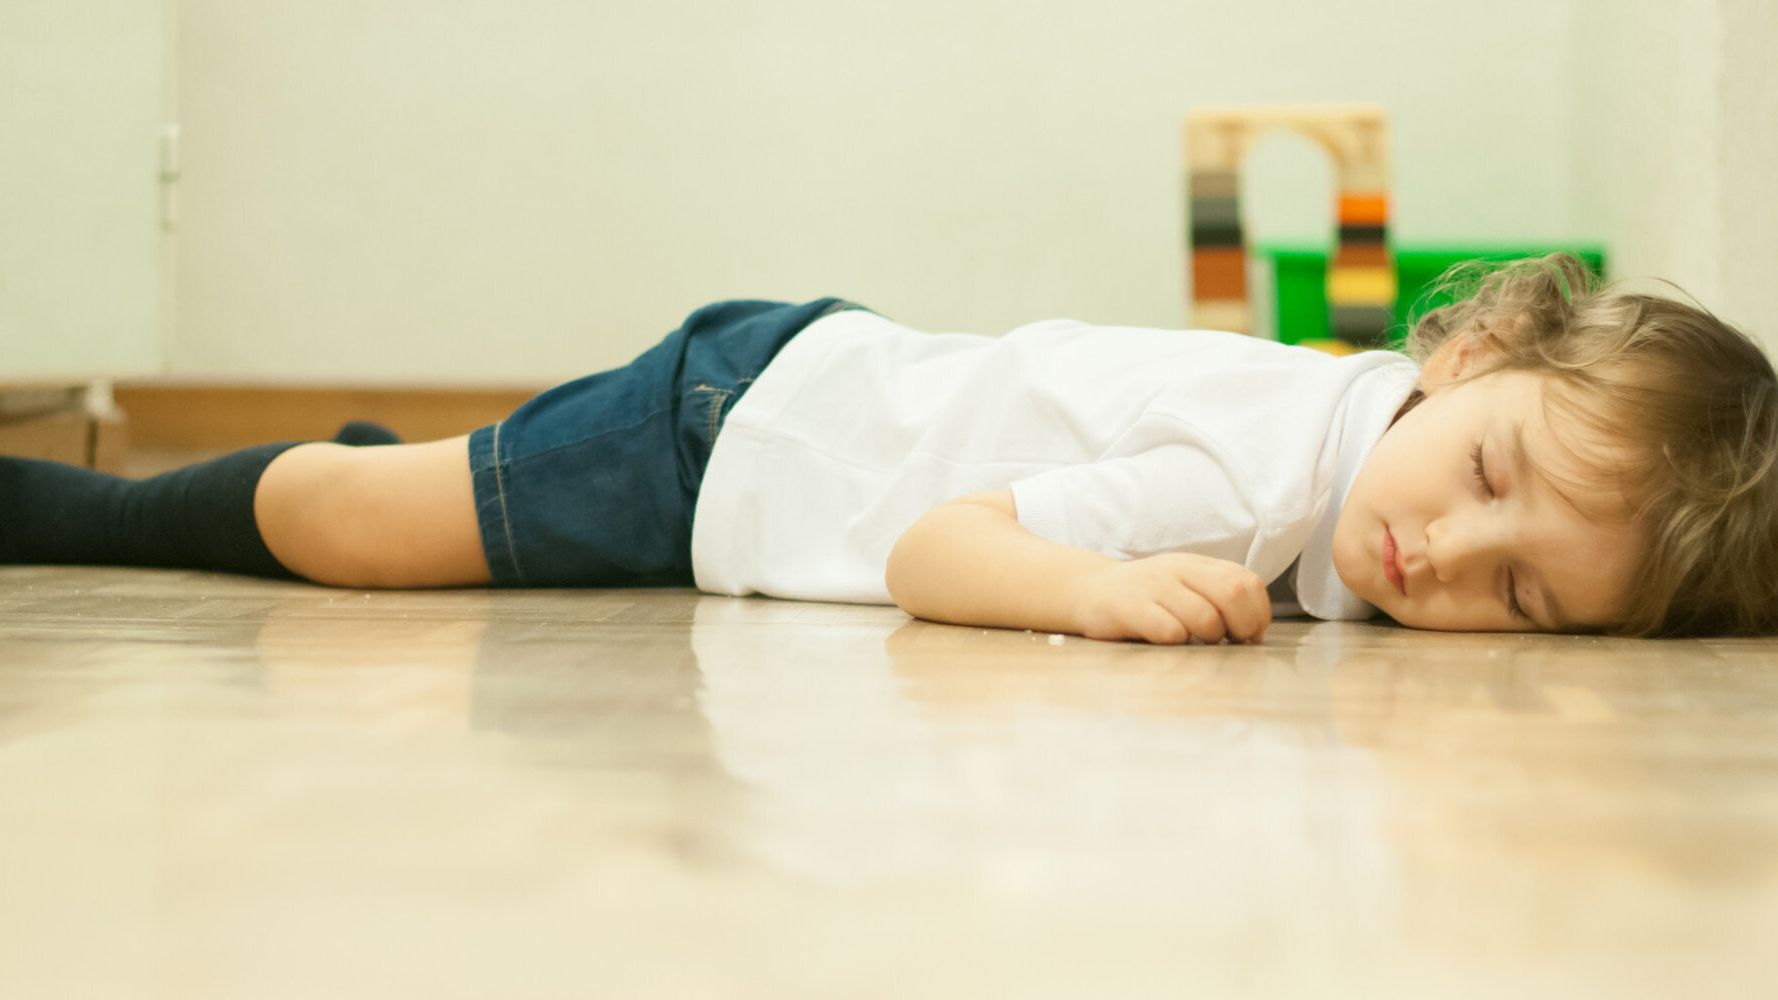 Kids on the Floor down Stomach